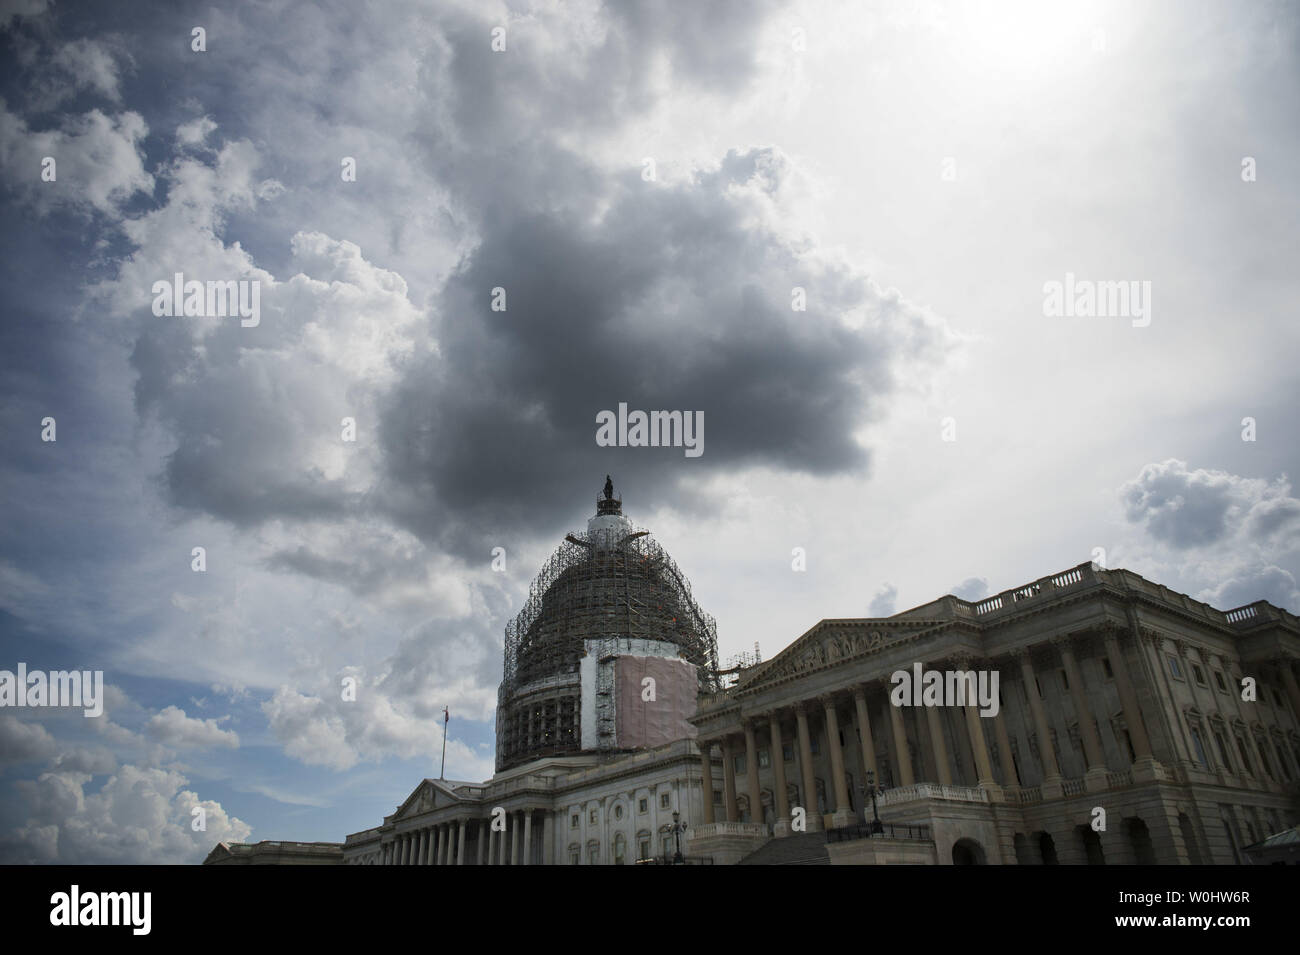 The U.S. Capitol Building is seen prior to a Senate vote on the U.S.A. Freedom Act during a rare Sunday session on Capitol Hill in Washington, D.C. on May 31, 2015. Three intelligence tools are set to expire later today with the Patriot Act, including the NSA's bulk collection of Americans' phone records. Lawmakers are debating the House's U.S.A Freedom Act which will renew certain intelligence tools. Photo by Kevin Dietsch/UPI. Stock Photo